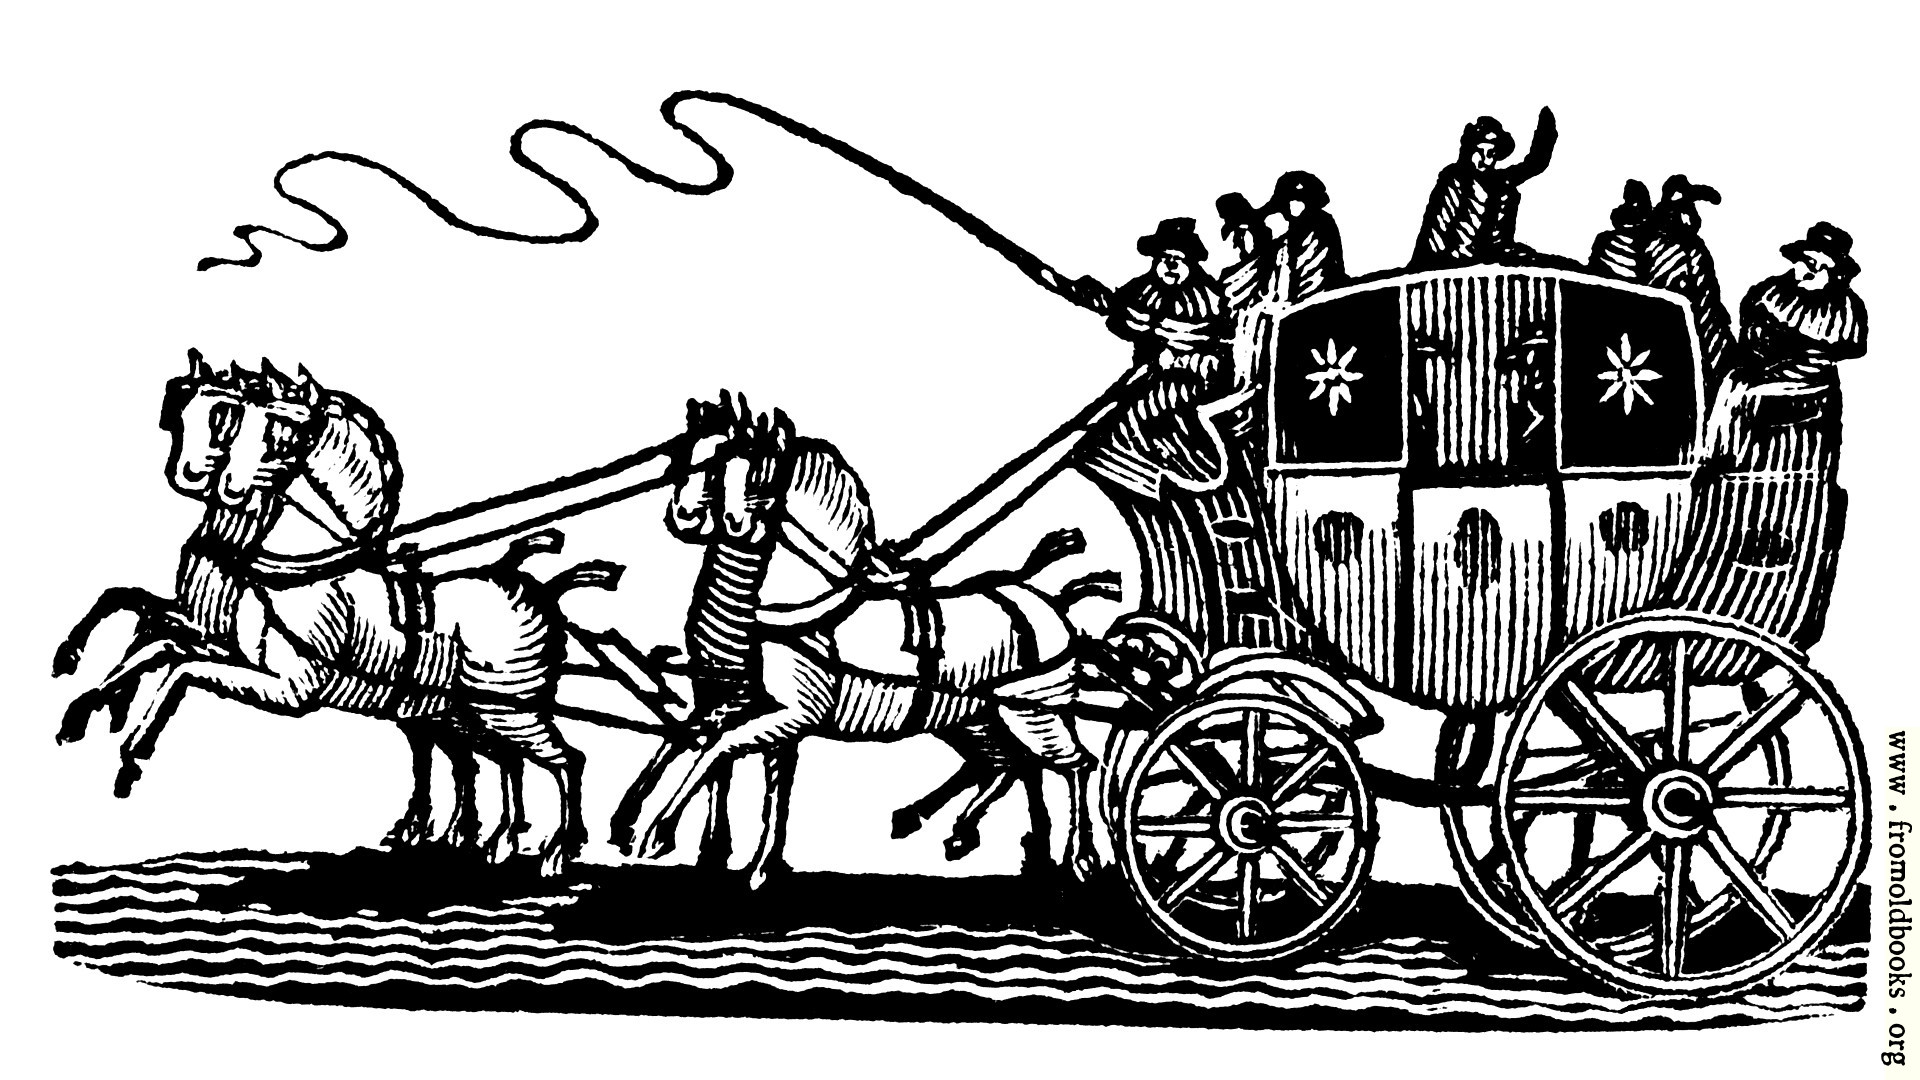 0159-horse-and-carriage-q90-1920x1080.jpg